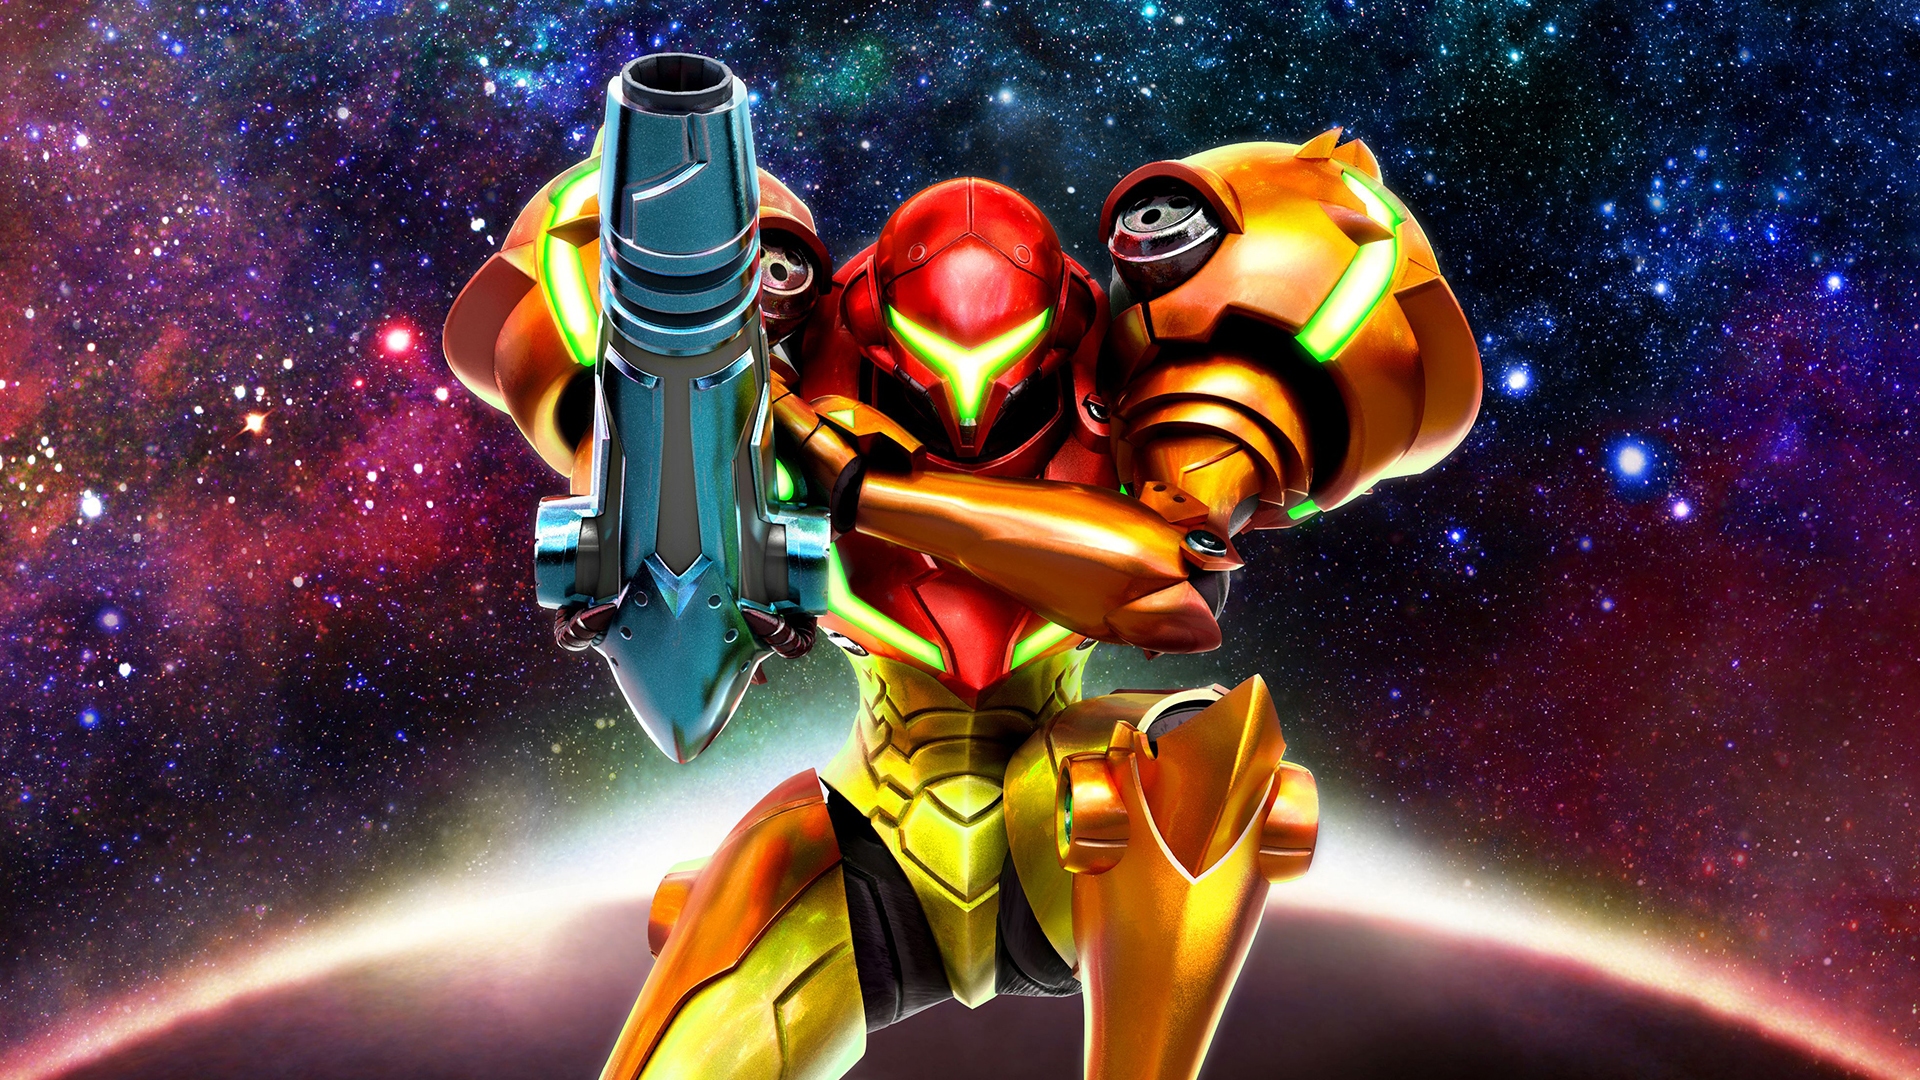 metroid wallpaper hd,fictional character,hero,space,games,fiction